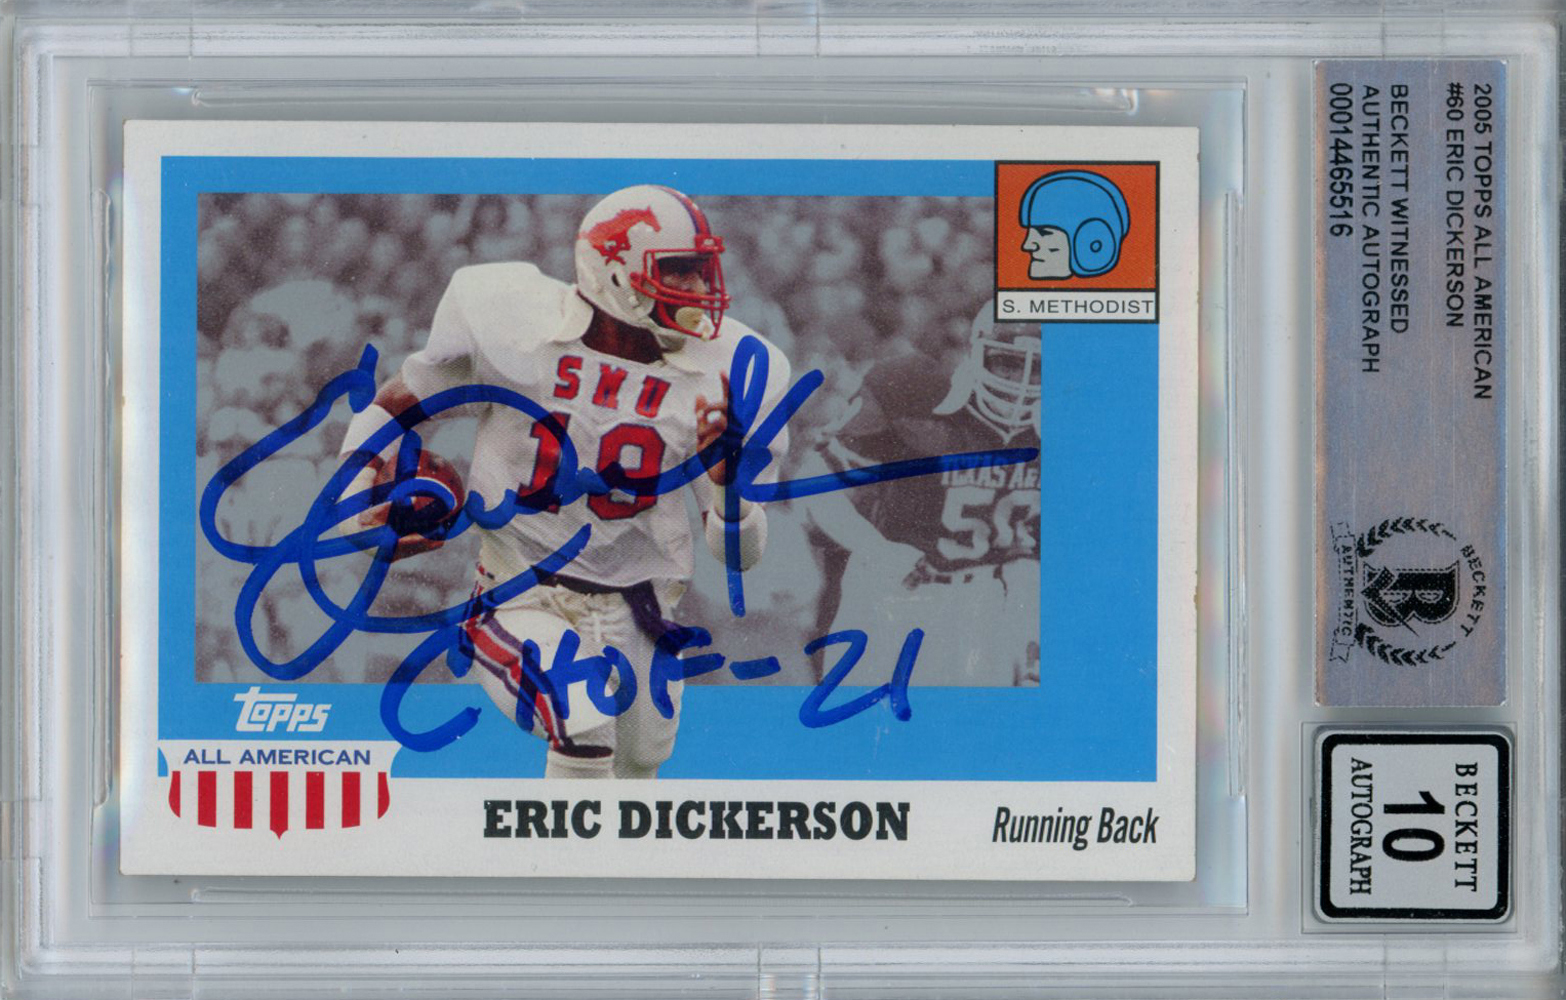 Eric Dickerson Signed 2005 Topps All American Trading Card CHOF BAS 10 Slab